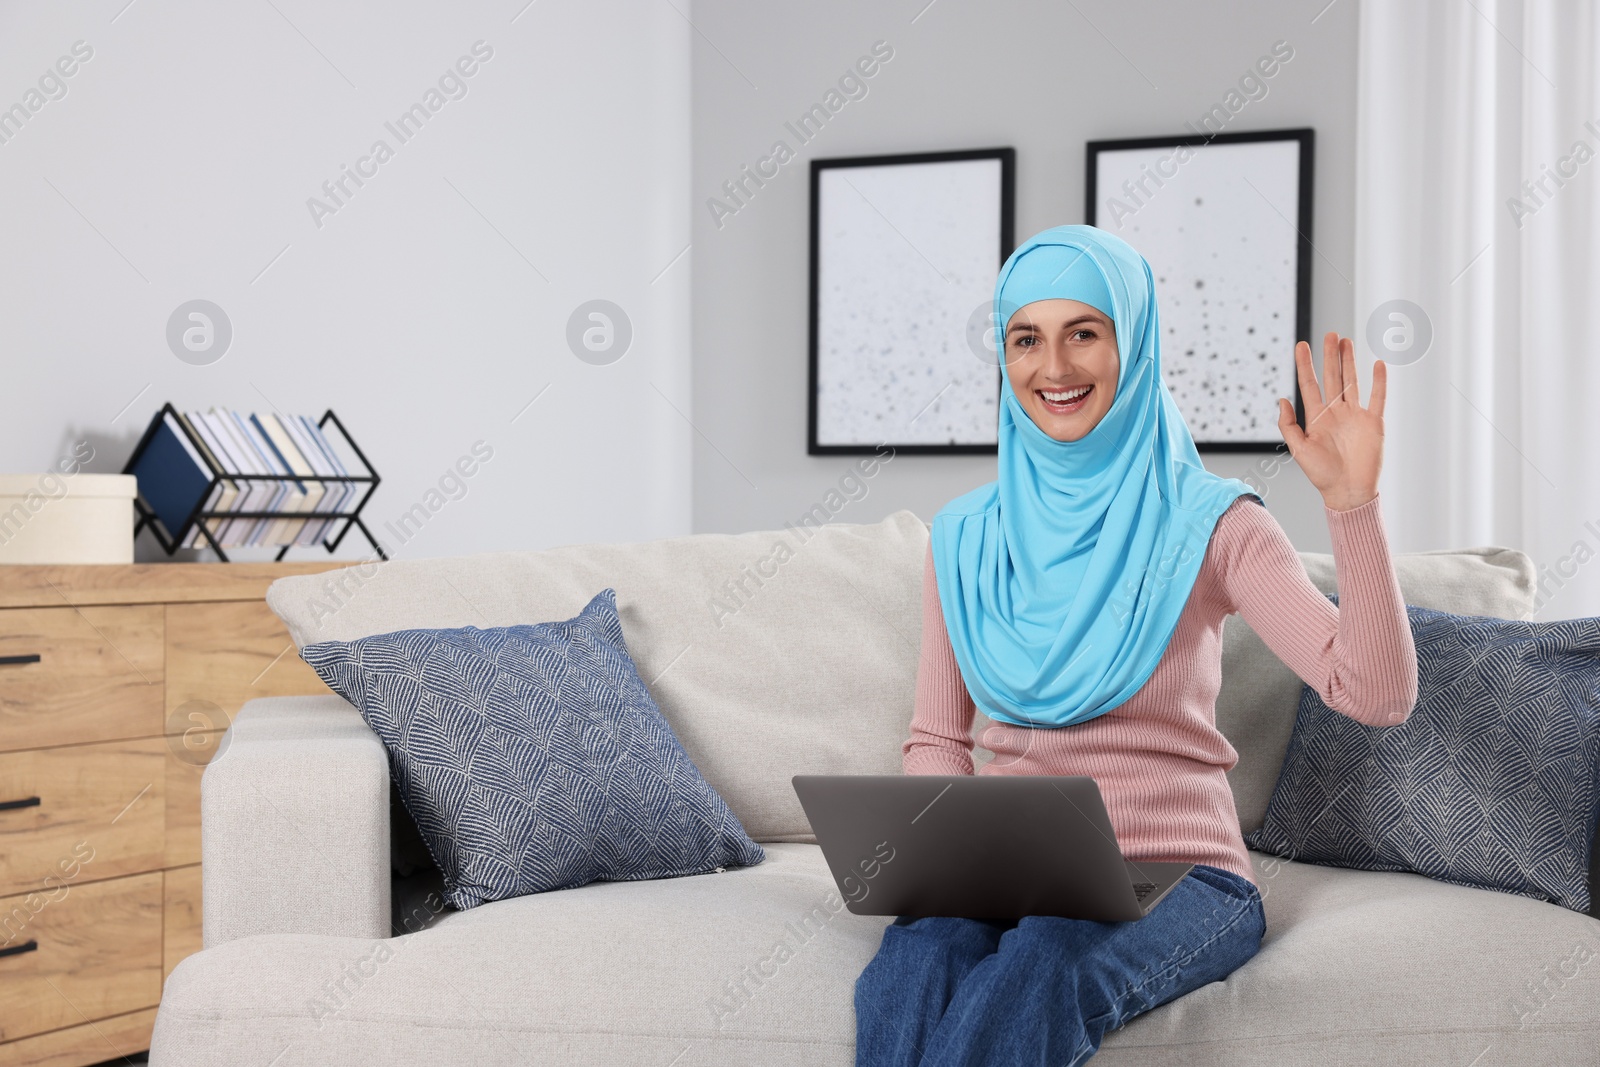 Photo of Muslim woman using laptop at couch in room. Space for text